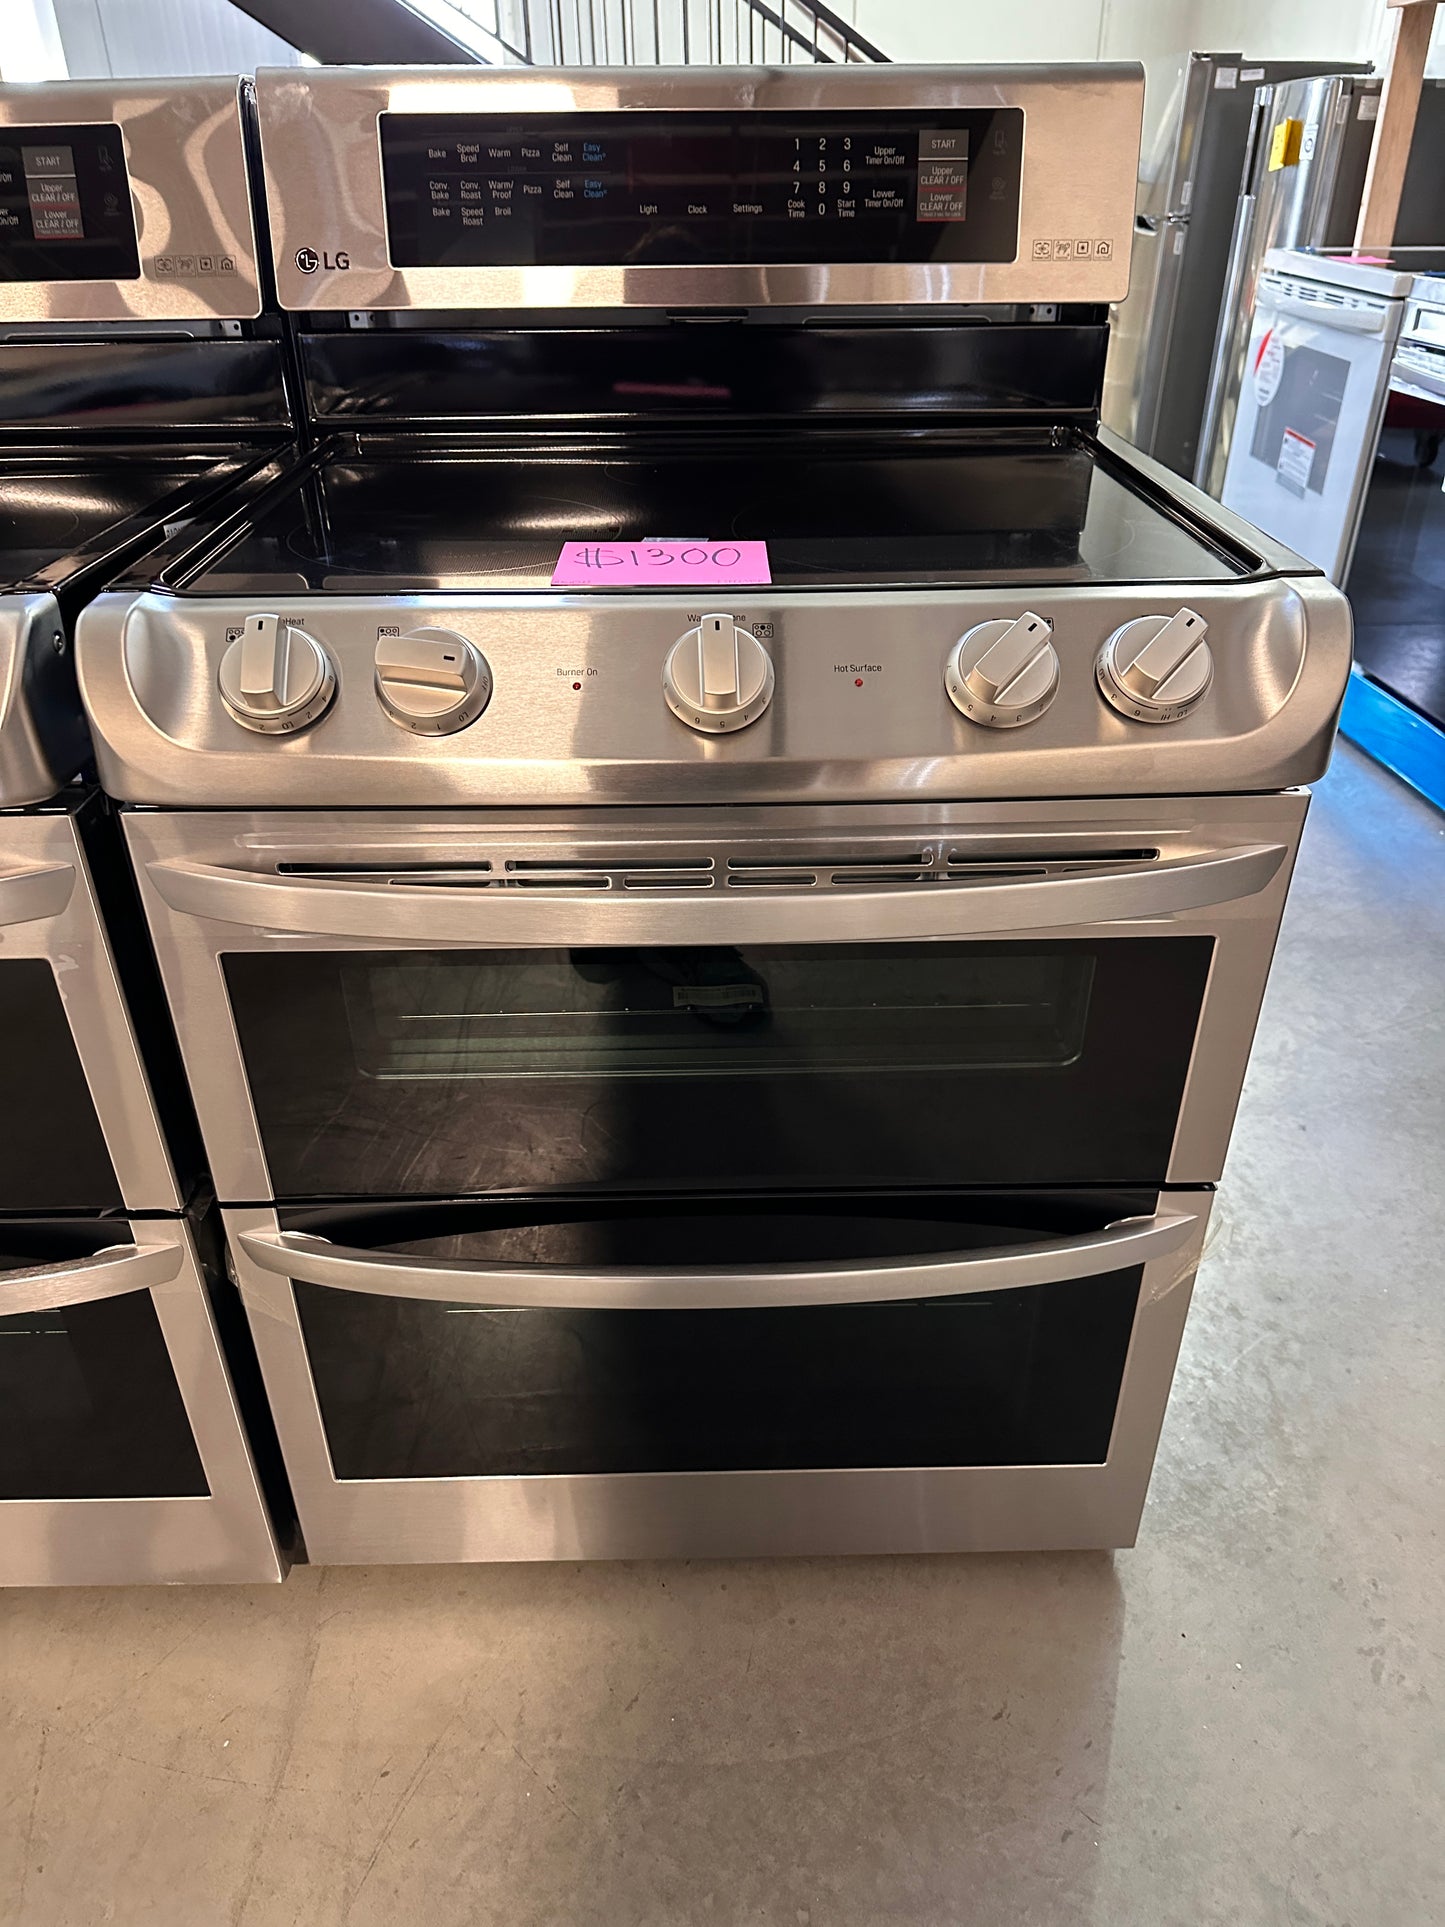 DOUBLE OVEN LG ELECTRIC RANGE with SELF-CLEANING - RAG11703 - LDE4413ST